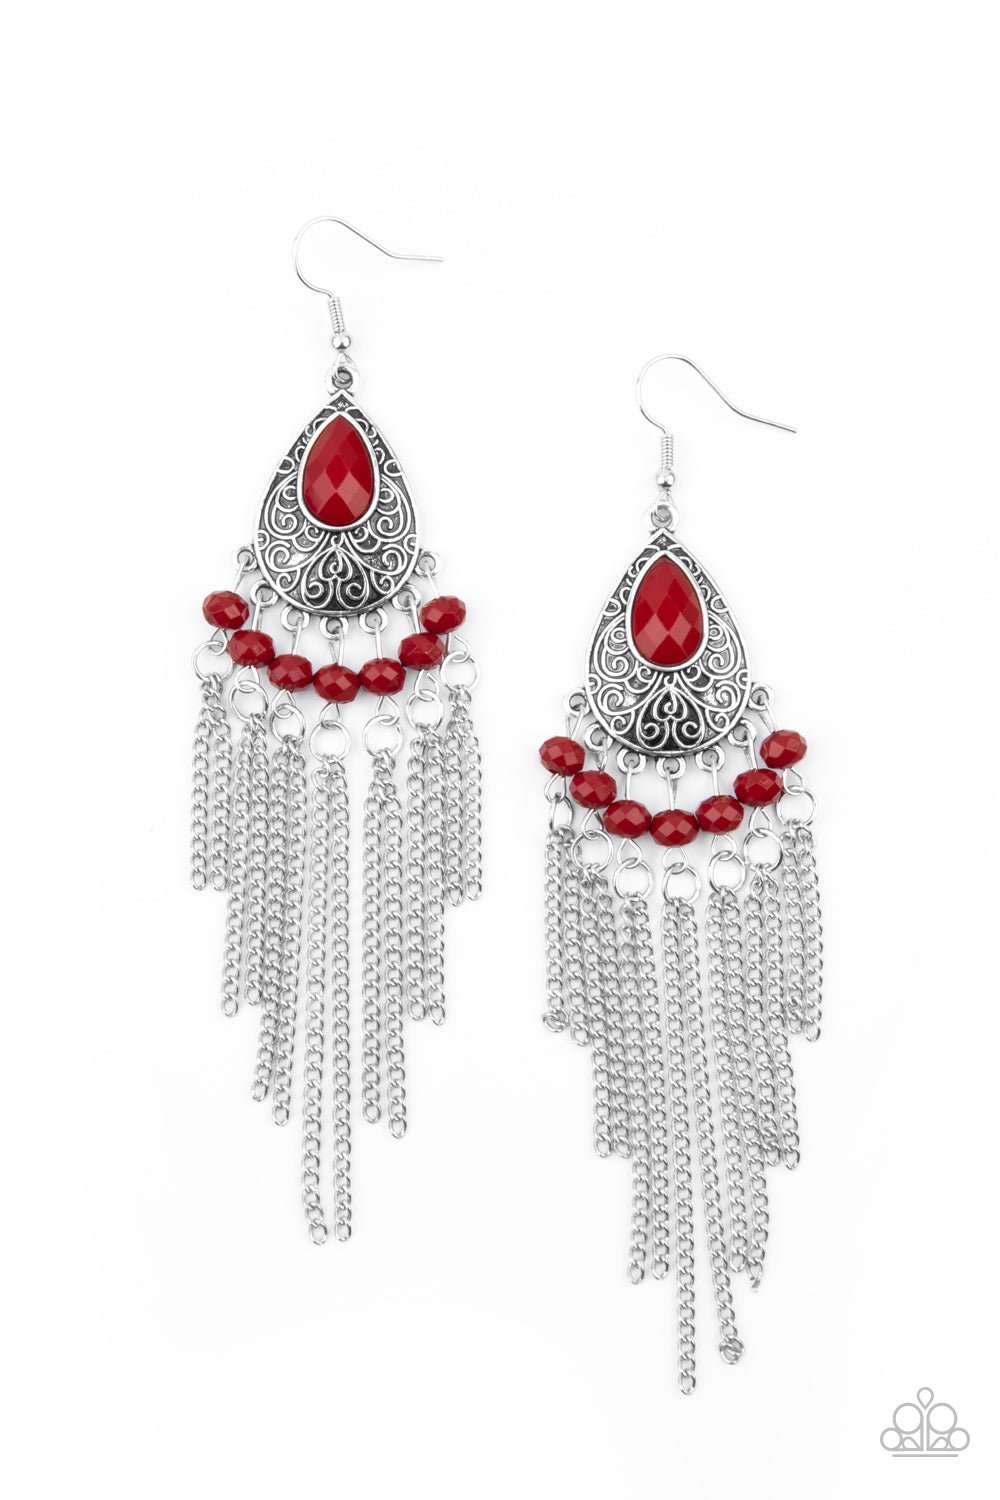 Paparazzi Accessories - Floating on HEIR - Red Earrings